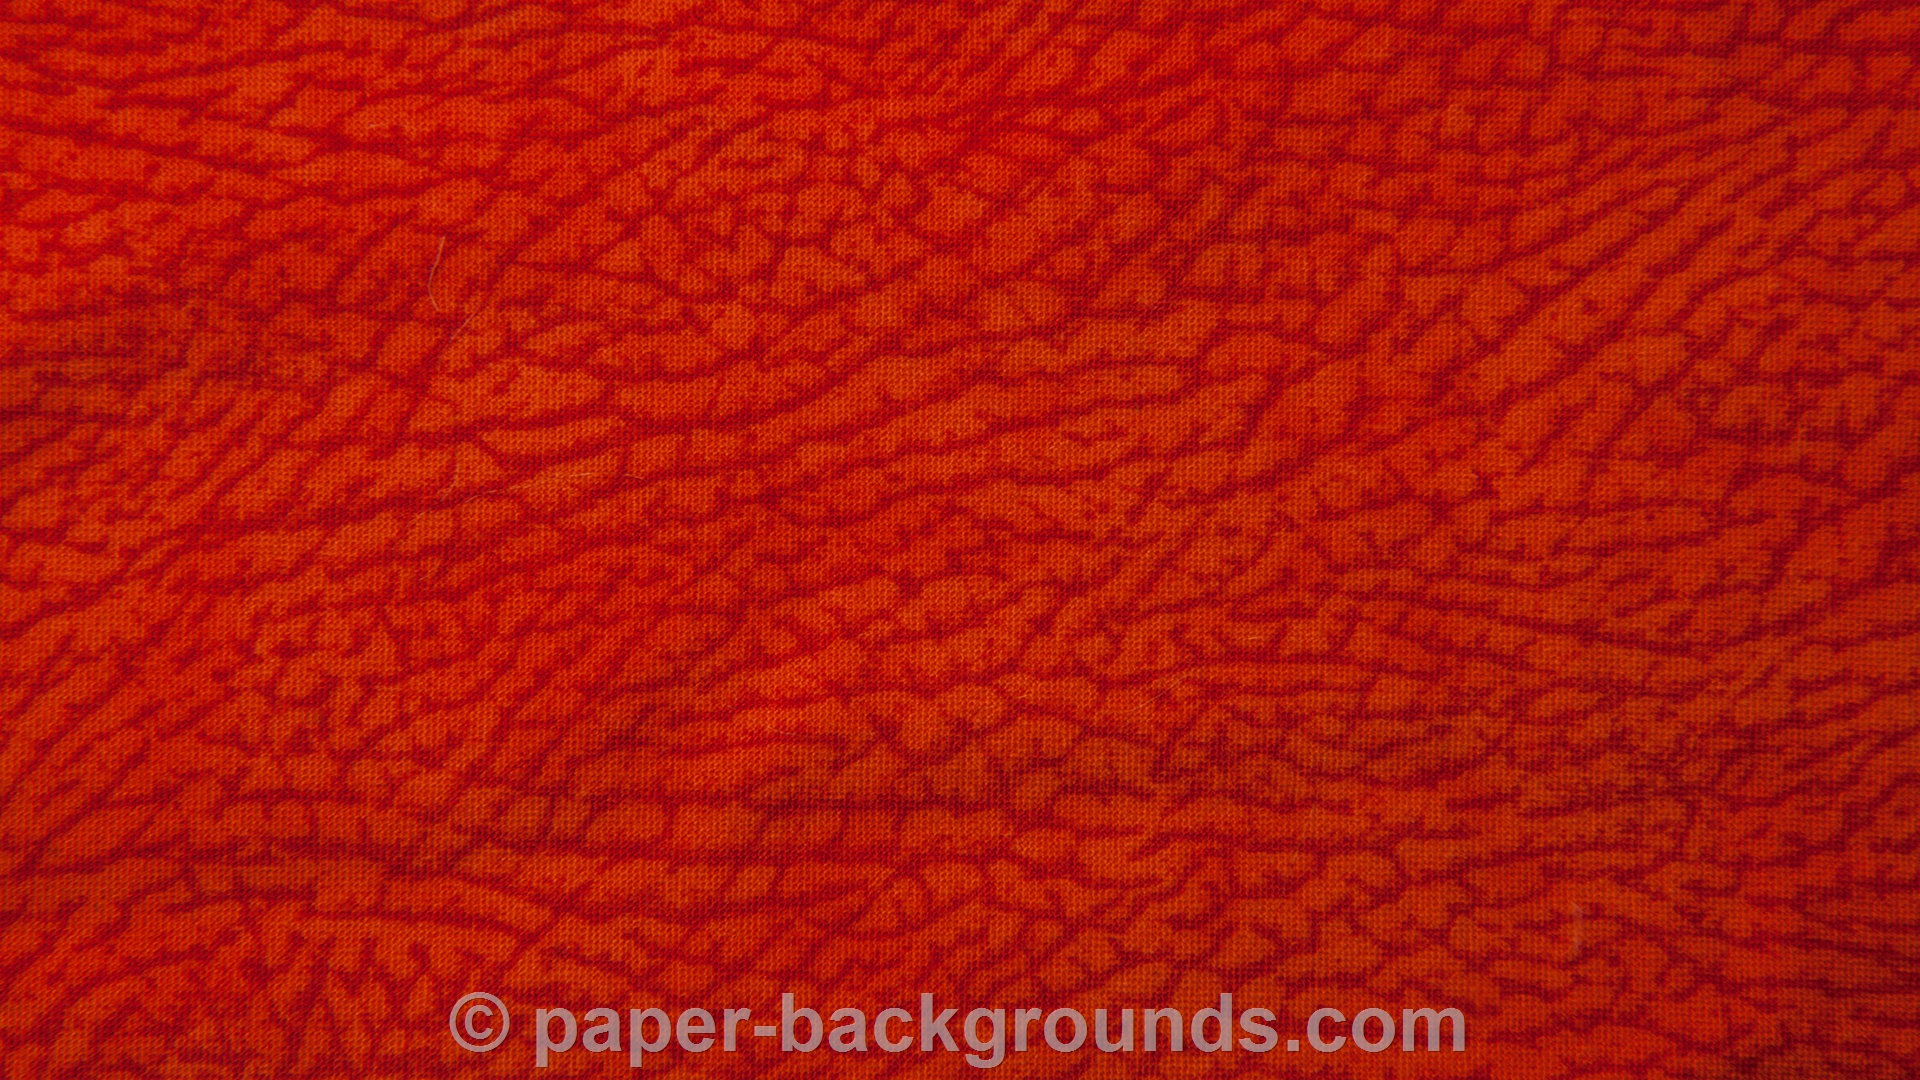 Red Fabric Texture With Abstract Pattern HD Paper Background